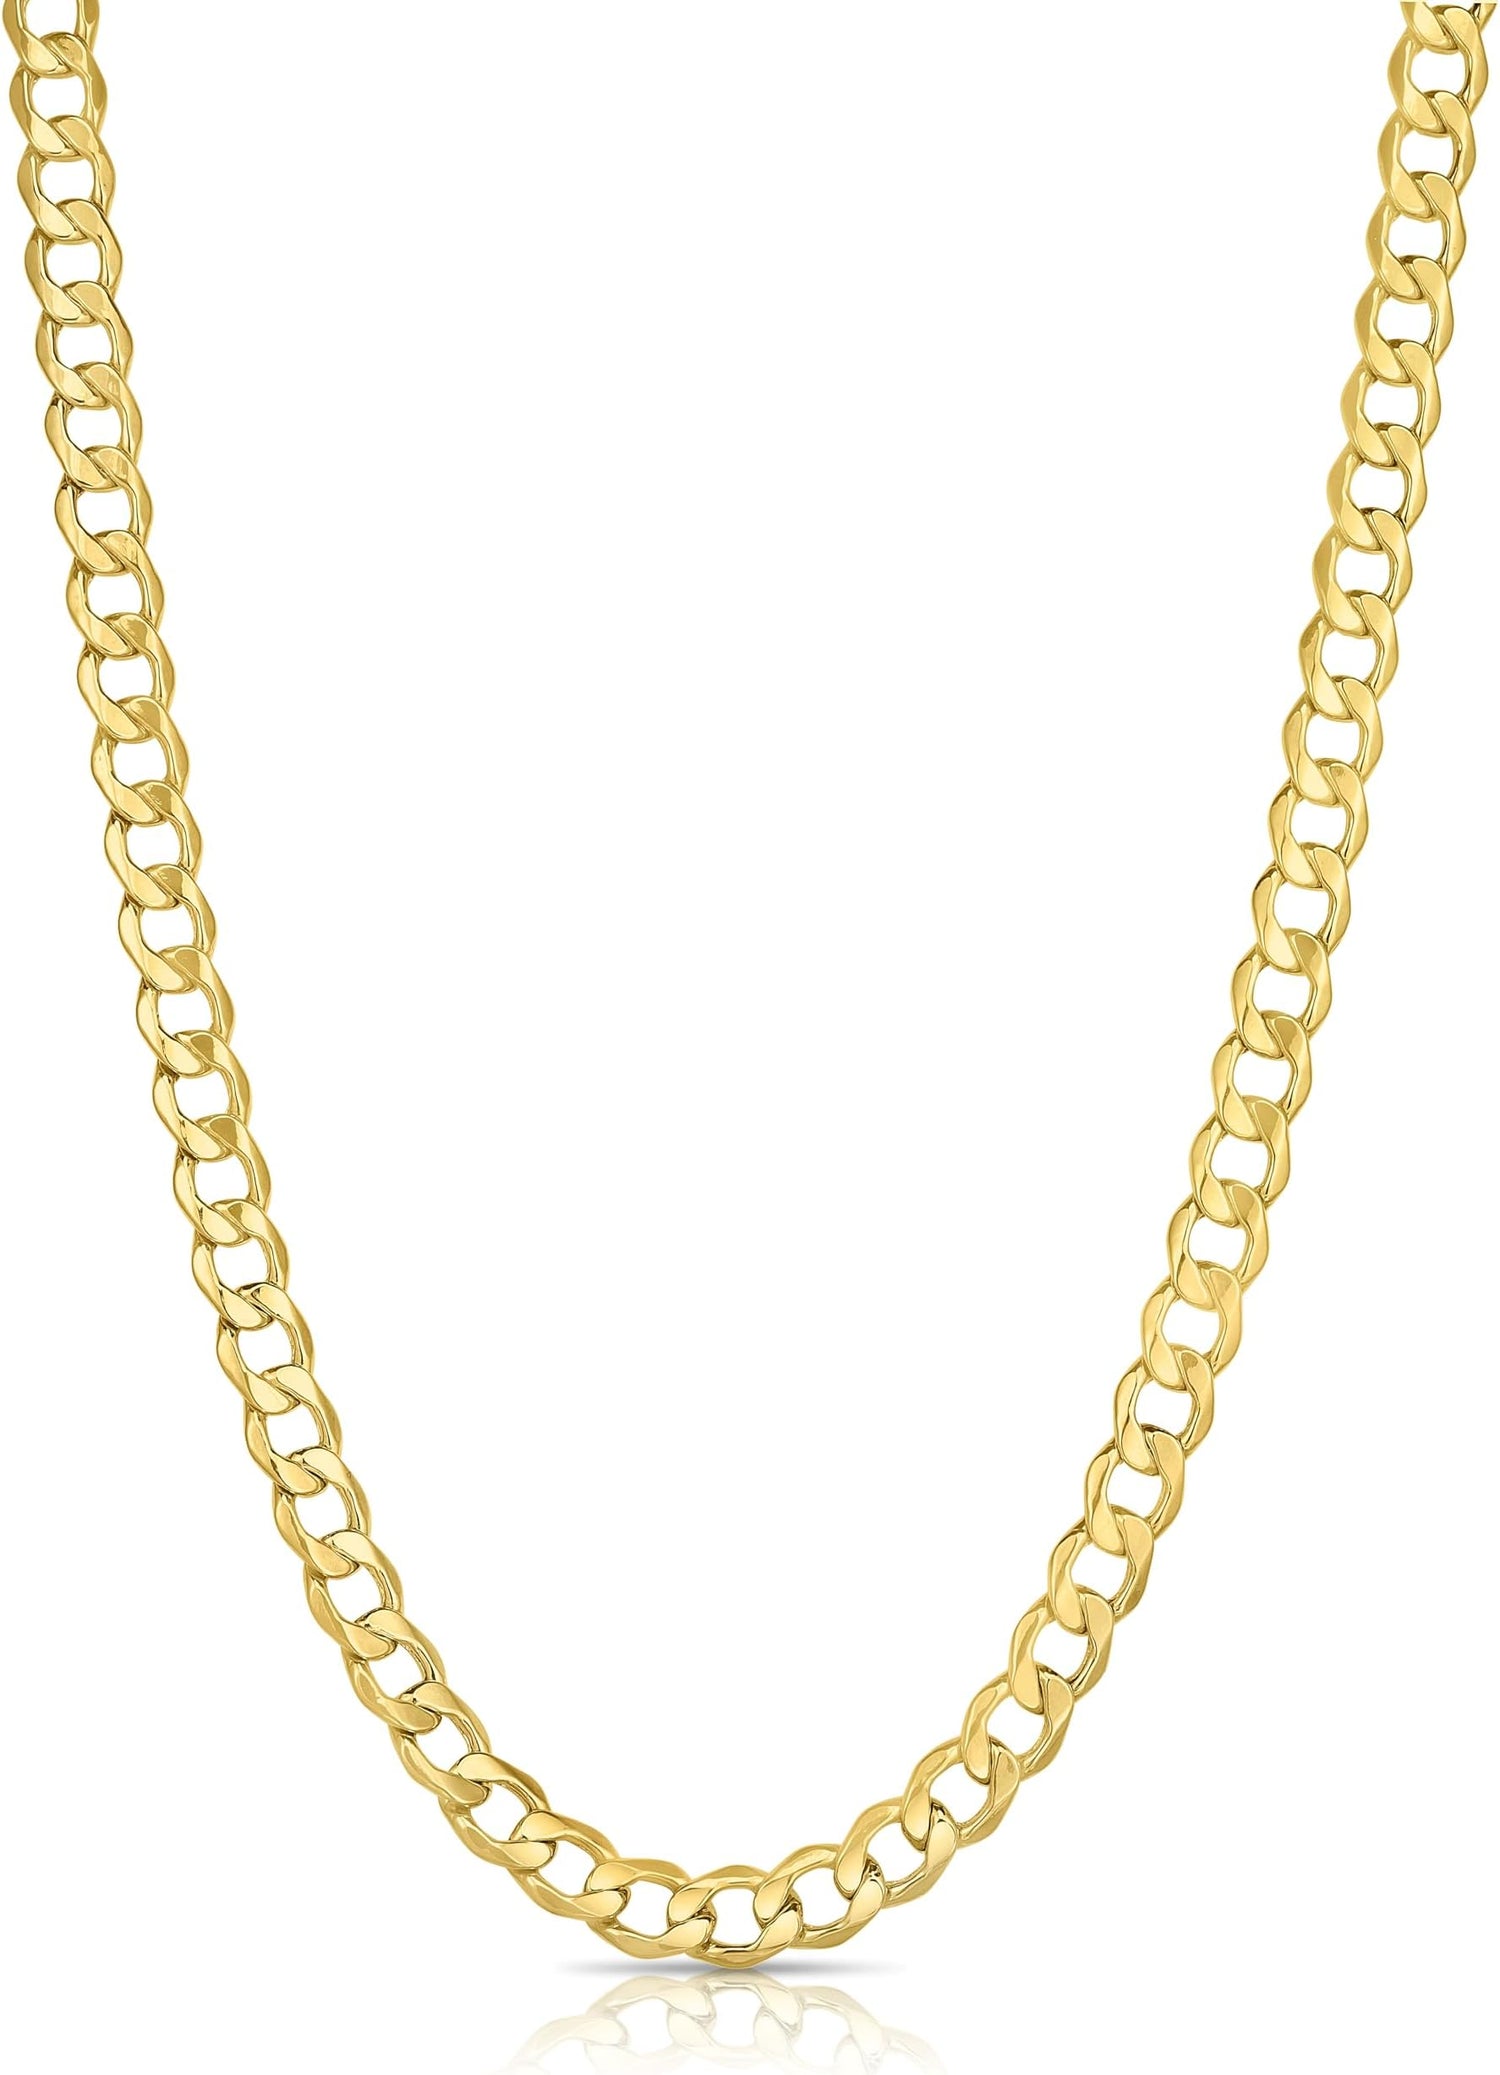 10k Yellow Gold 6mm Hollow Cuban Curb Link Chain Necklace